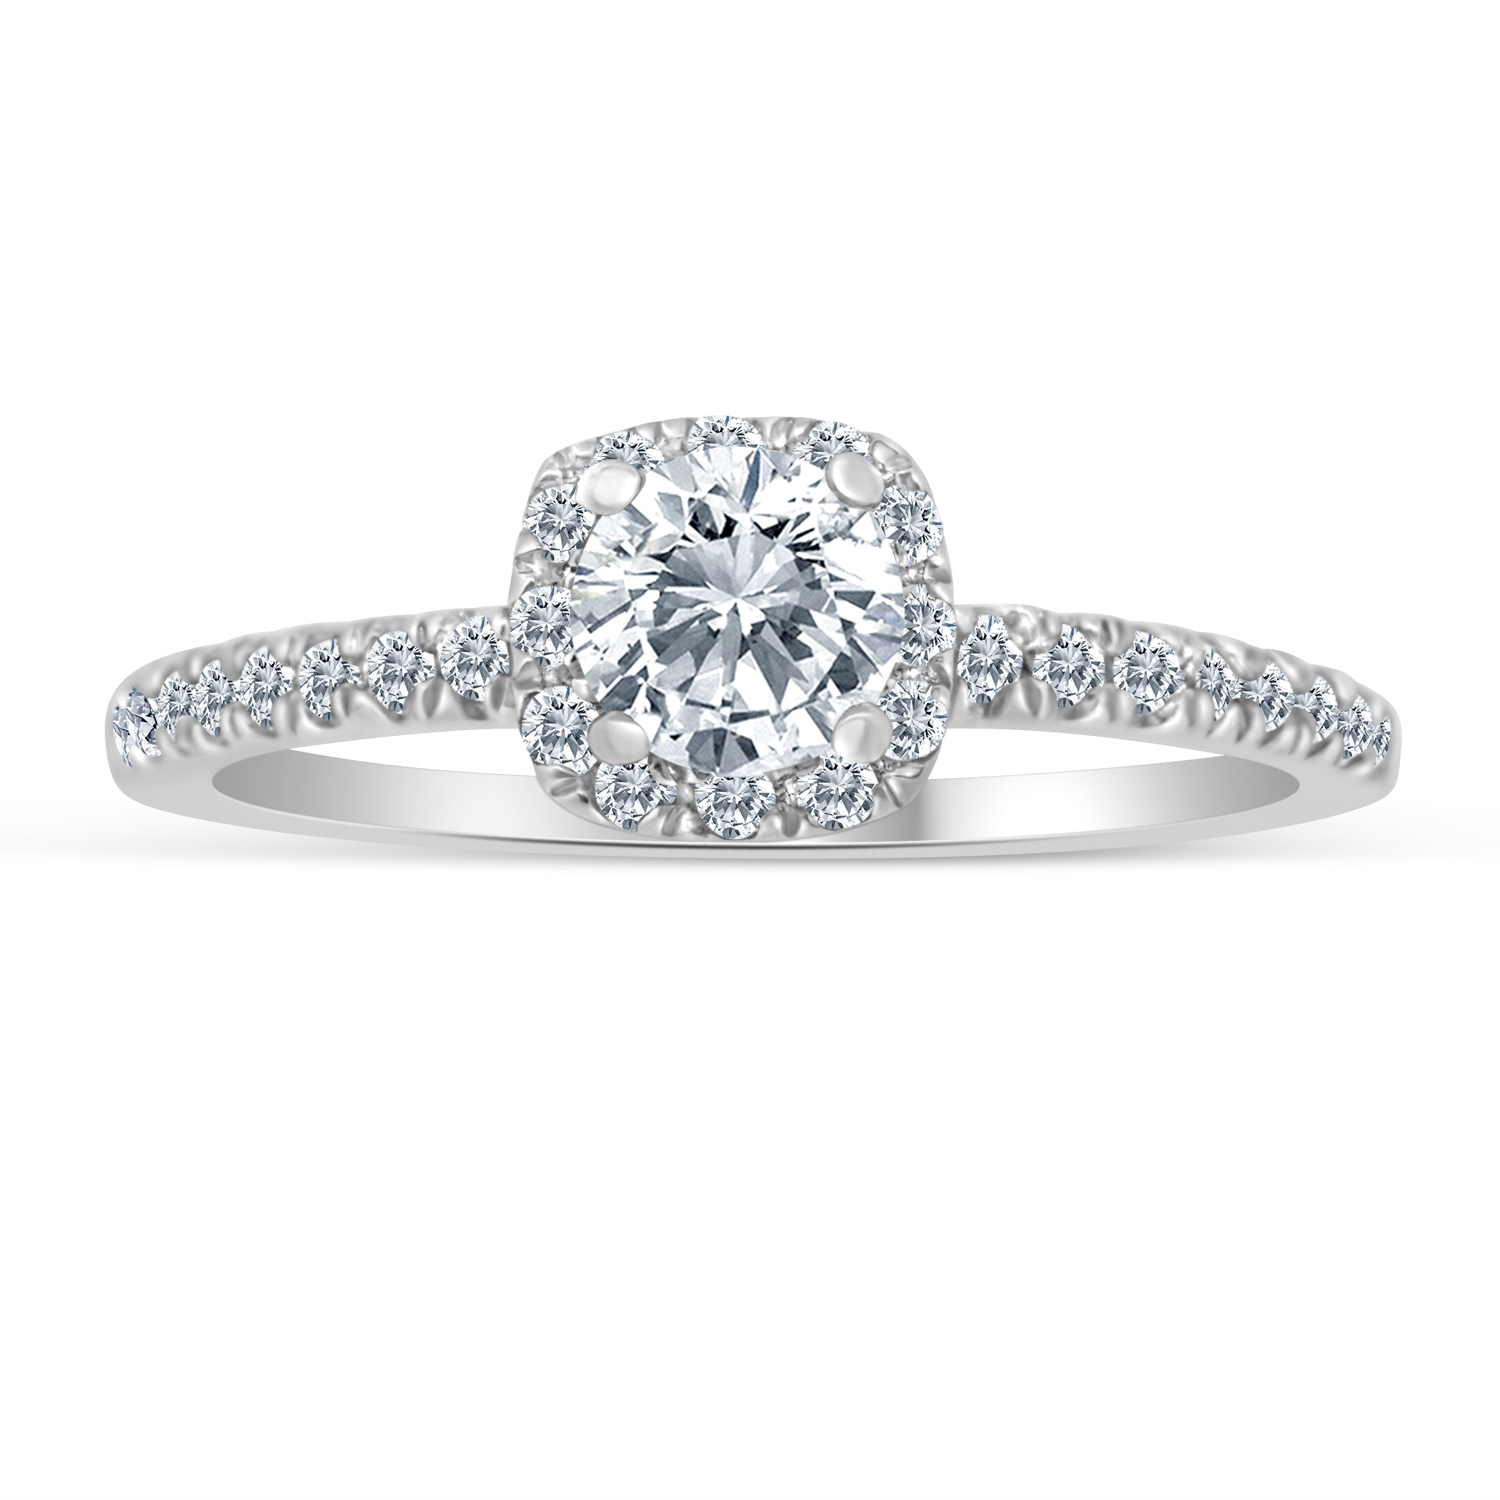 SK Jewel,Inc 1/2ctw Diamond Halo Engagement Ring in 10k White Gold